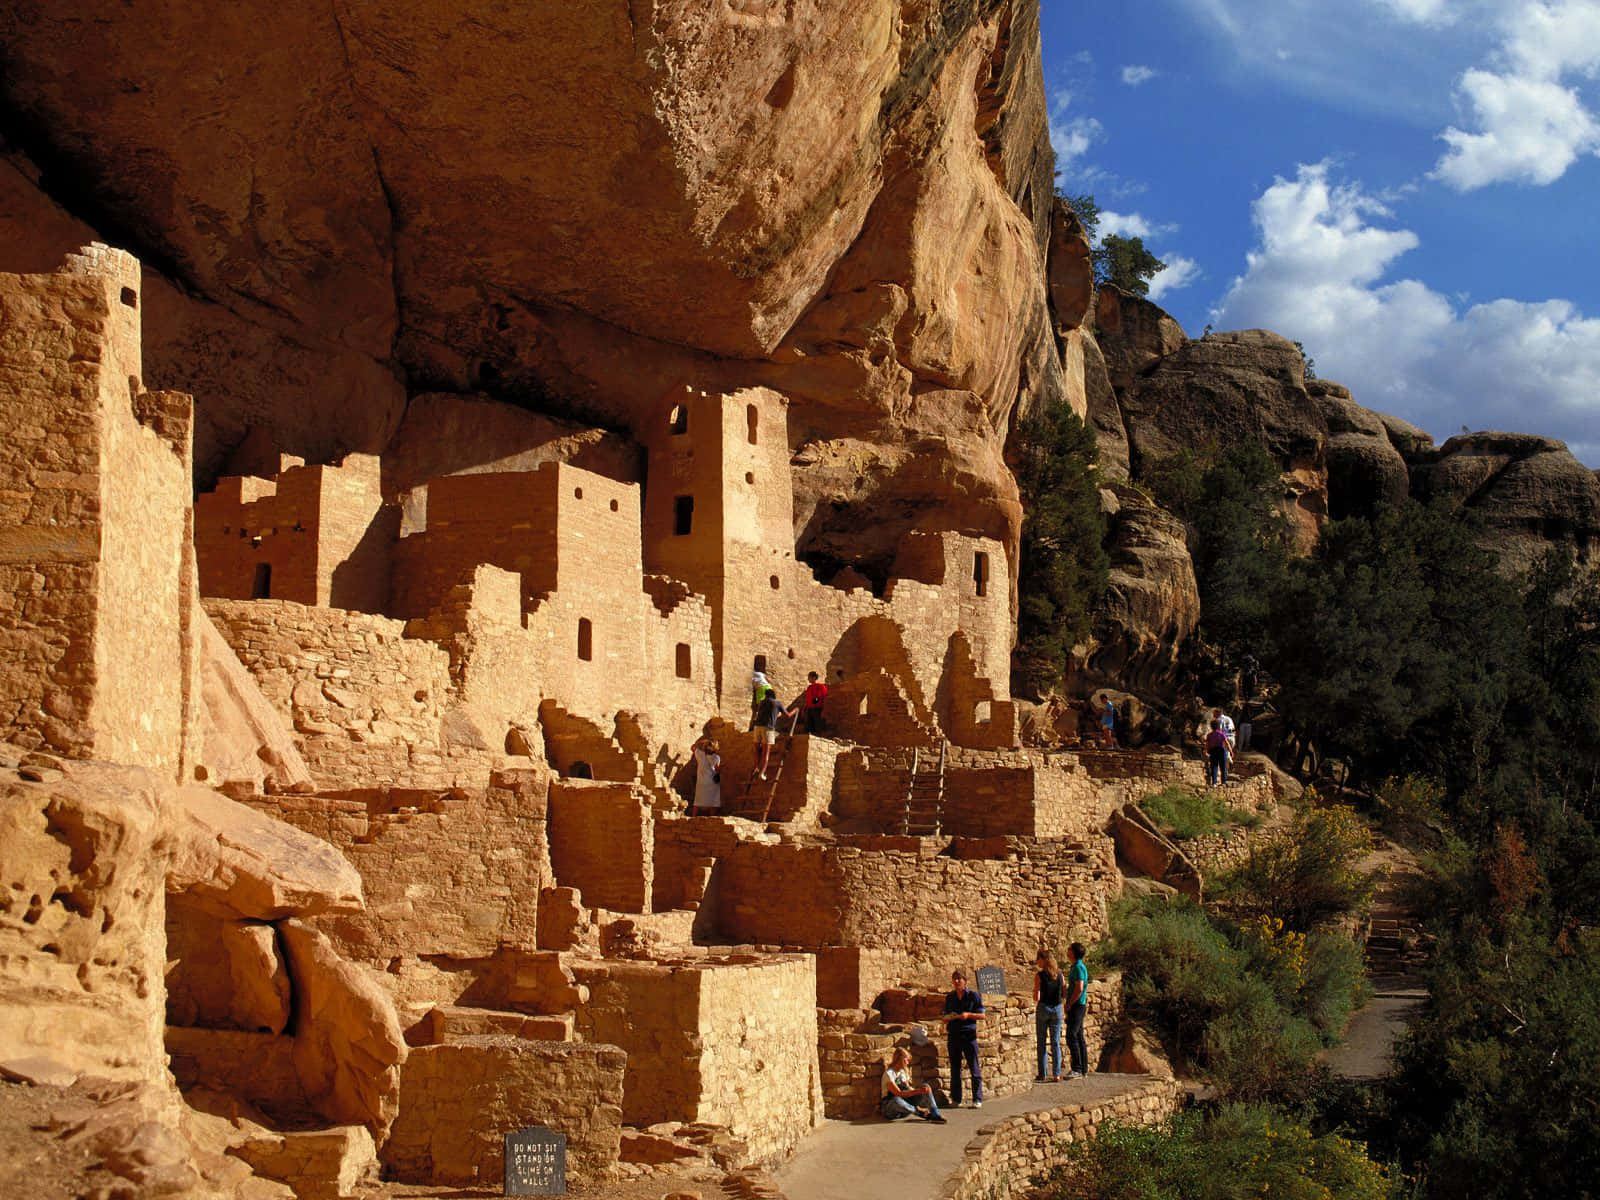 People Touring The Cliff Palace Mesa Verde National Park Background